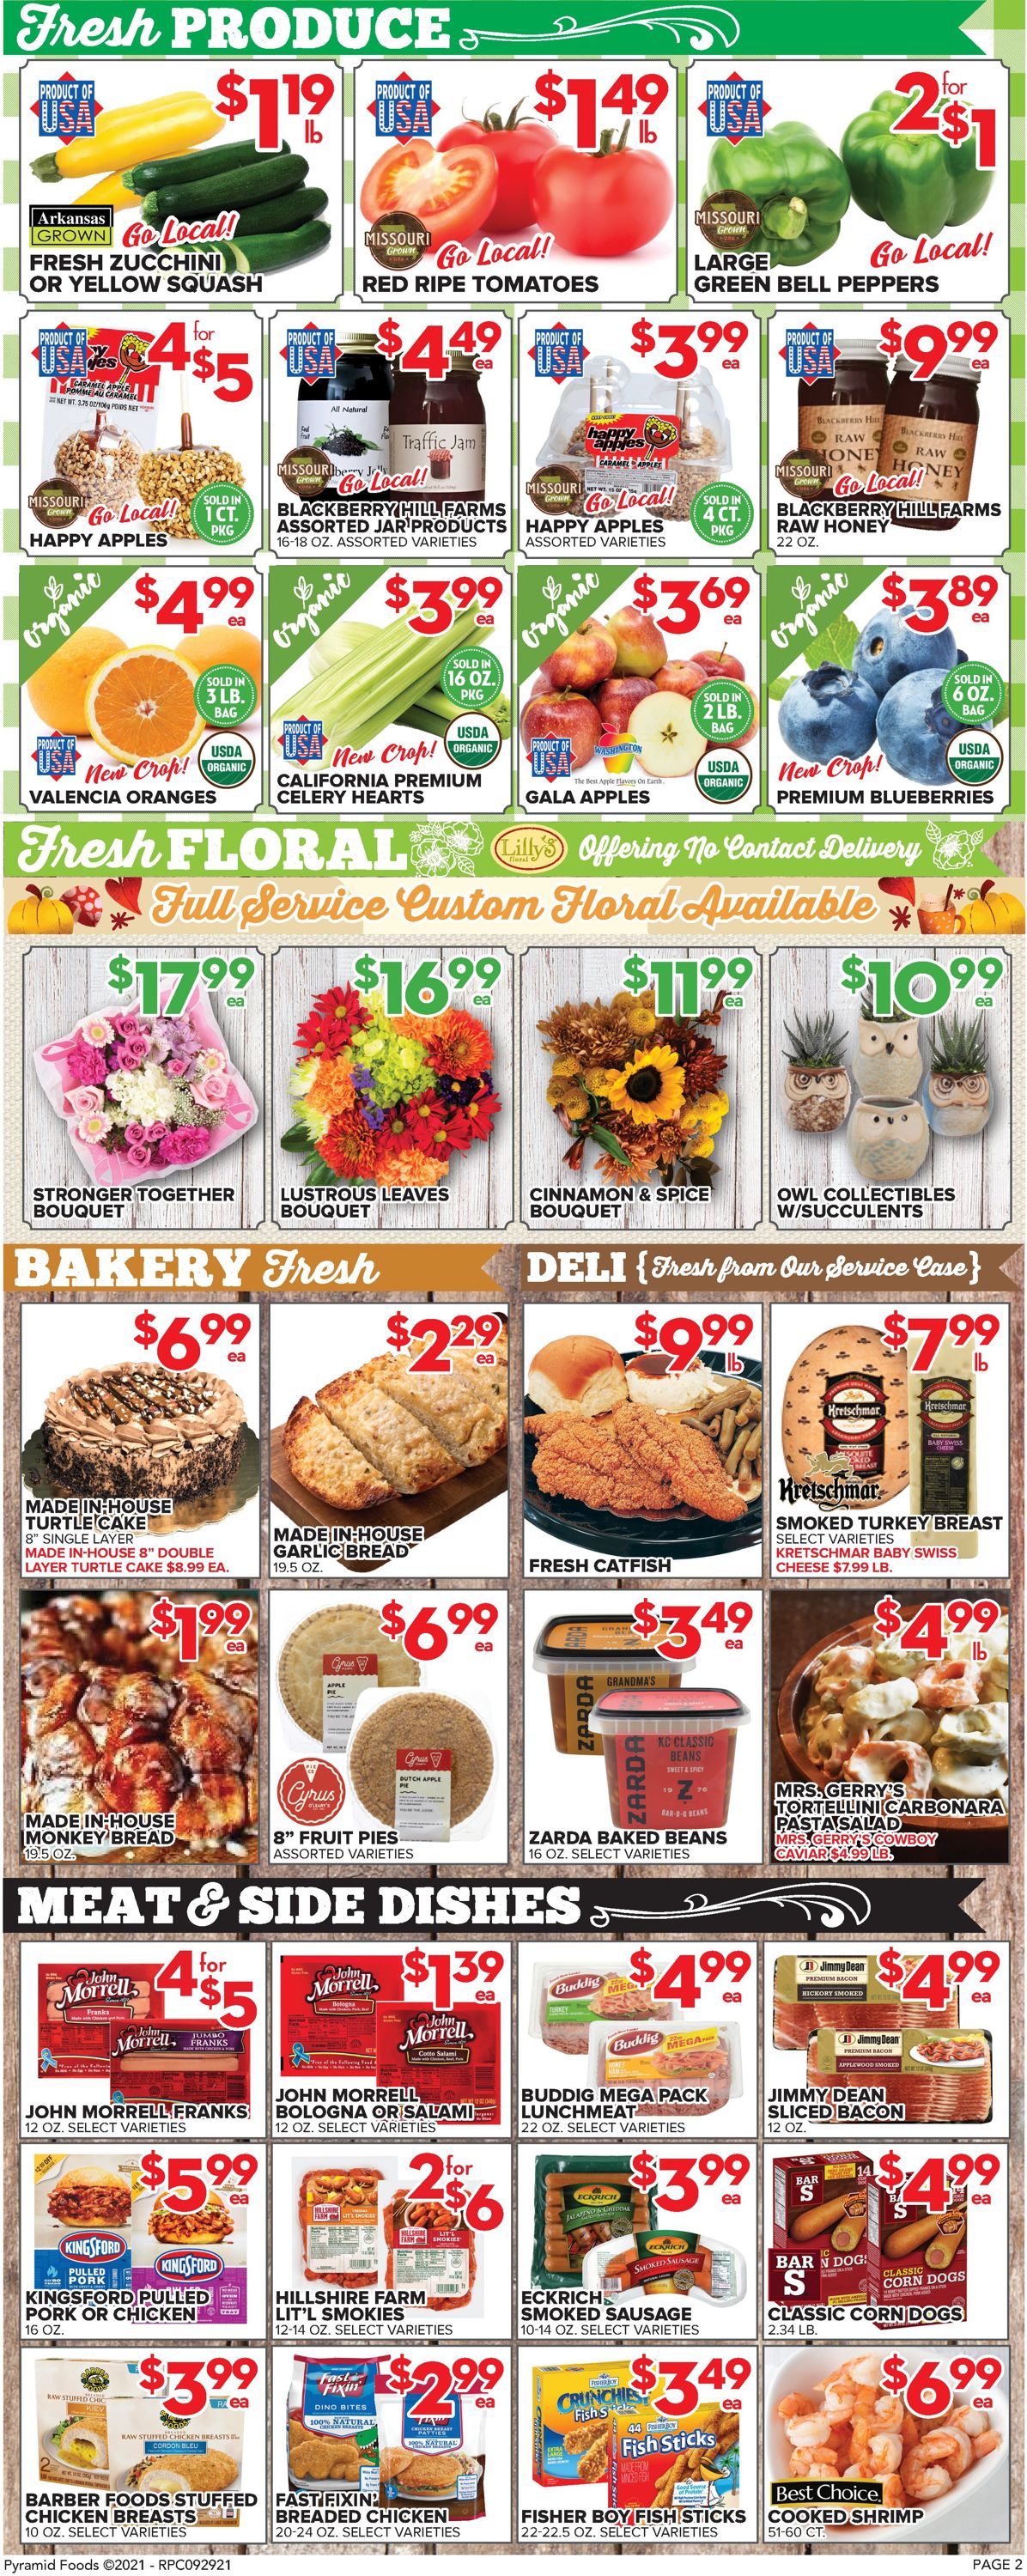 Price Cutter Weekly Ad Circular - valid 09/29-10/05/2021 (Page 2)